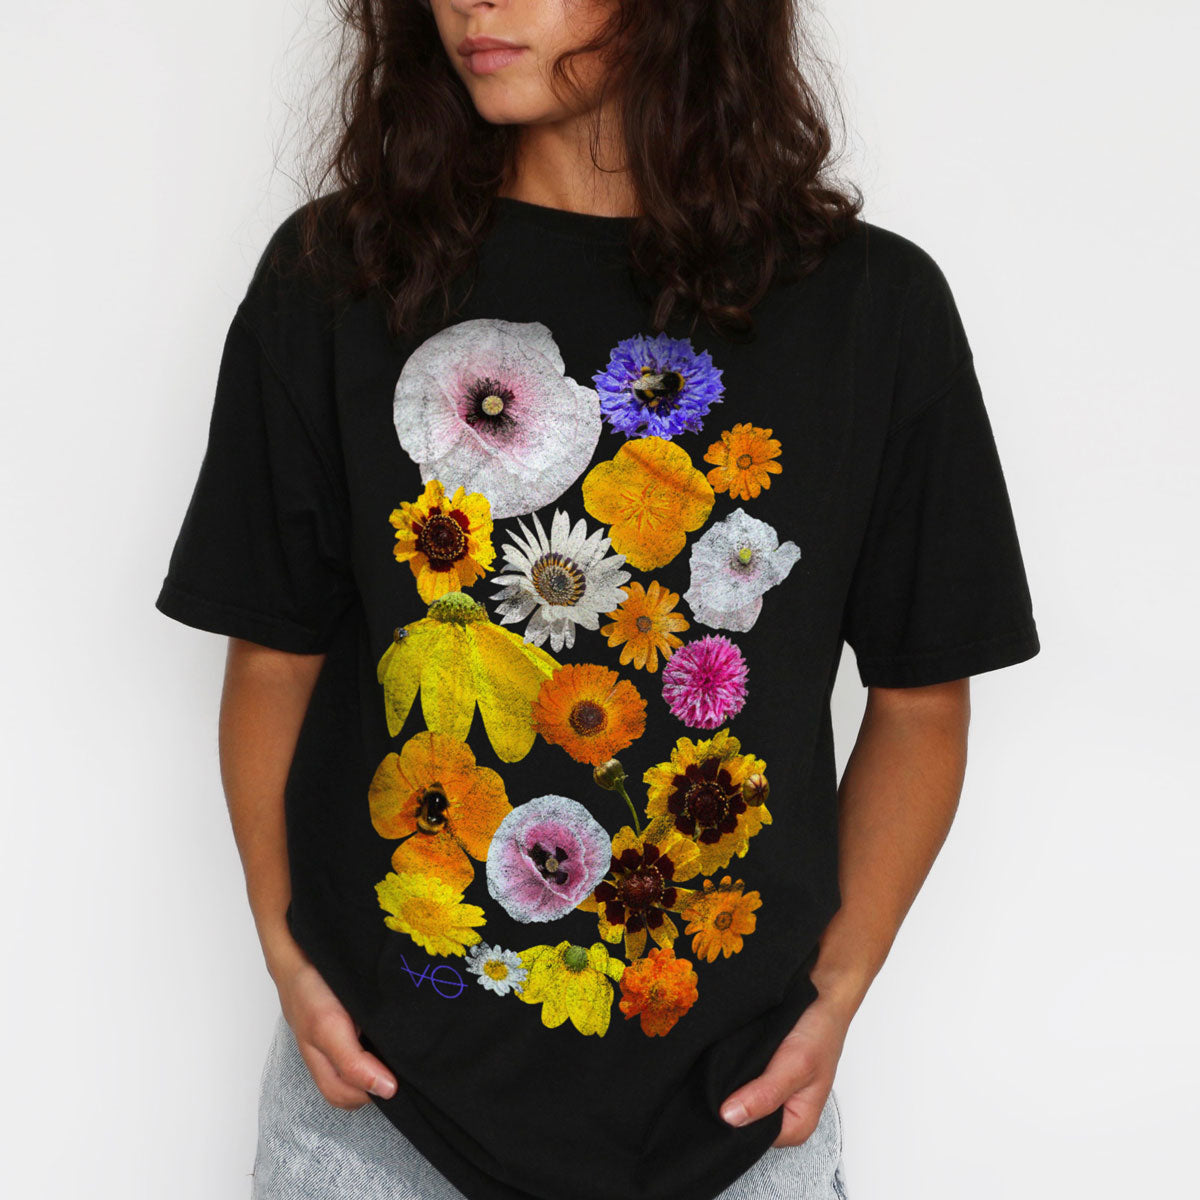 Pressed Wildflowers T-Shirt (Unisex) product